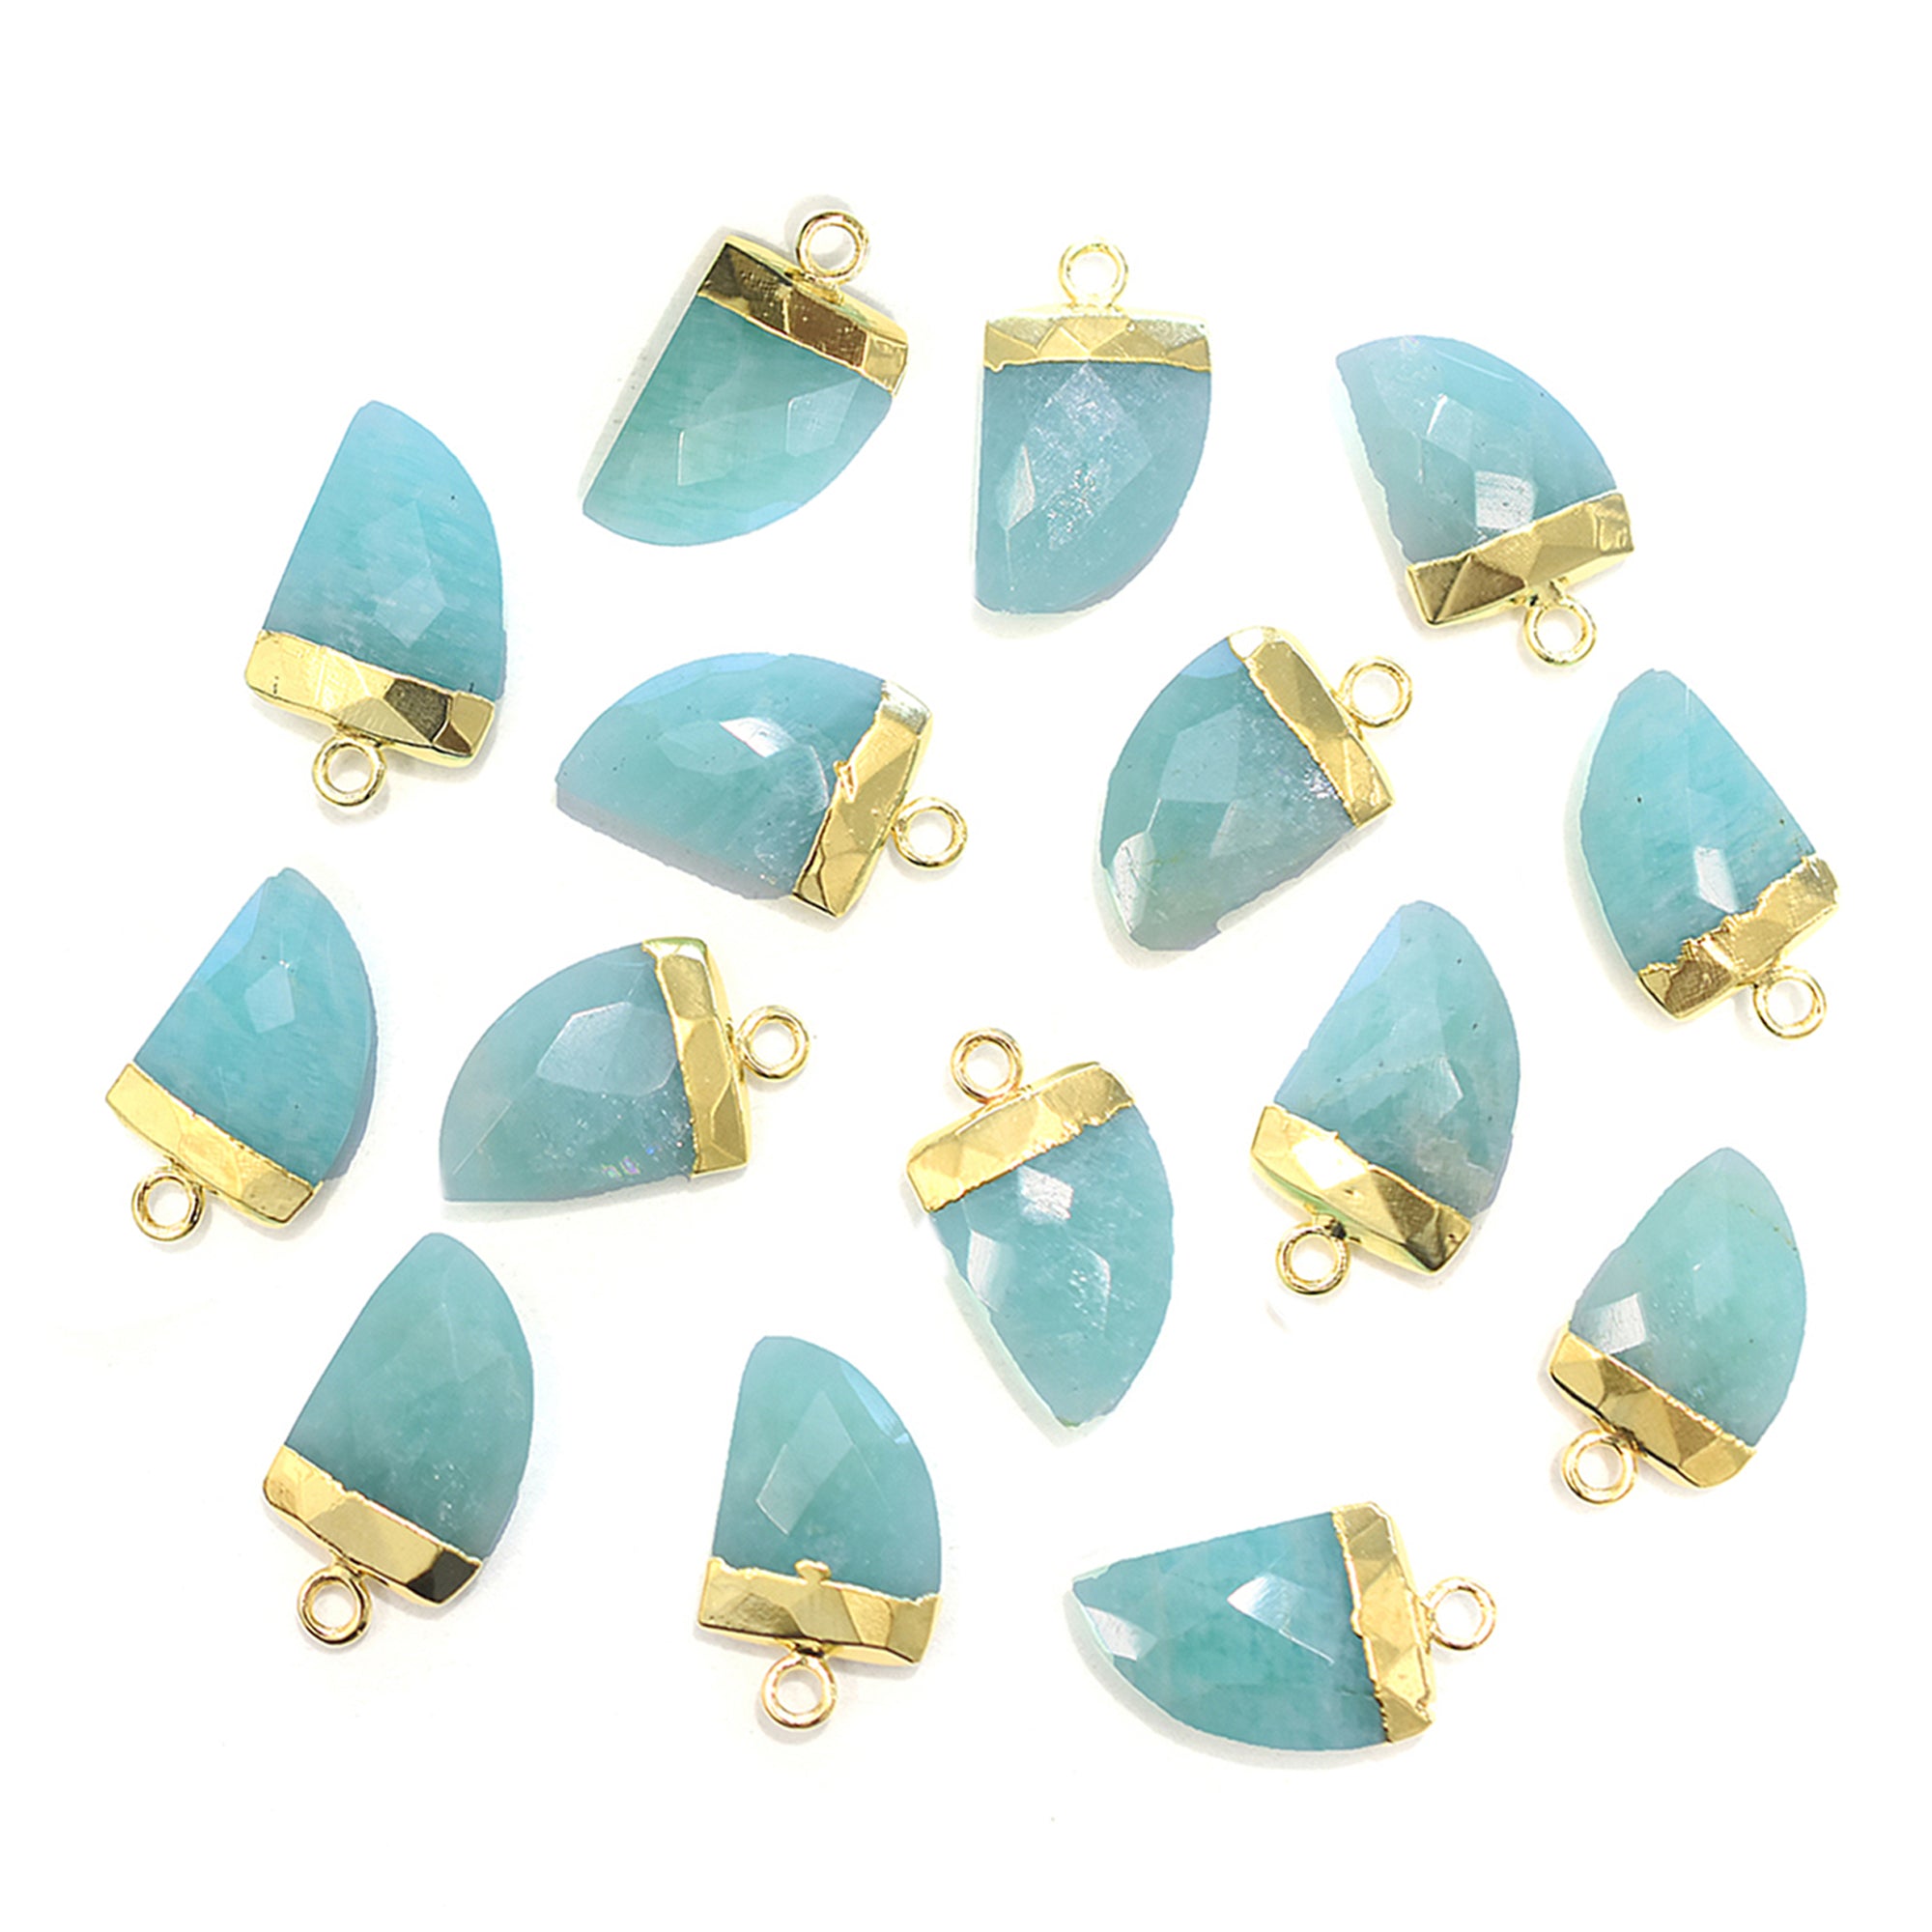 Amazonite 14X10 MM Horn Shape Gold Electroplated Pendant